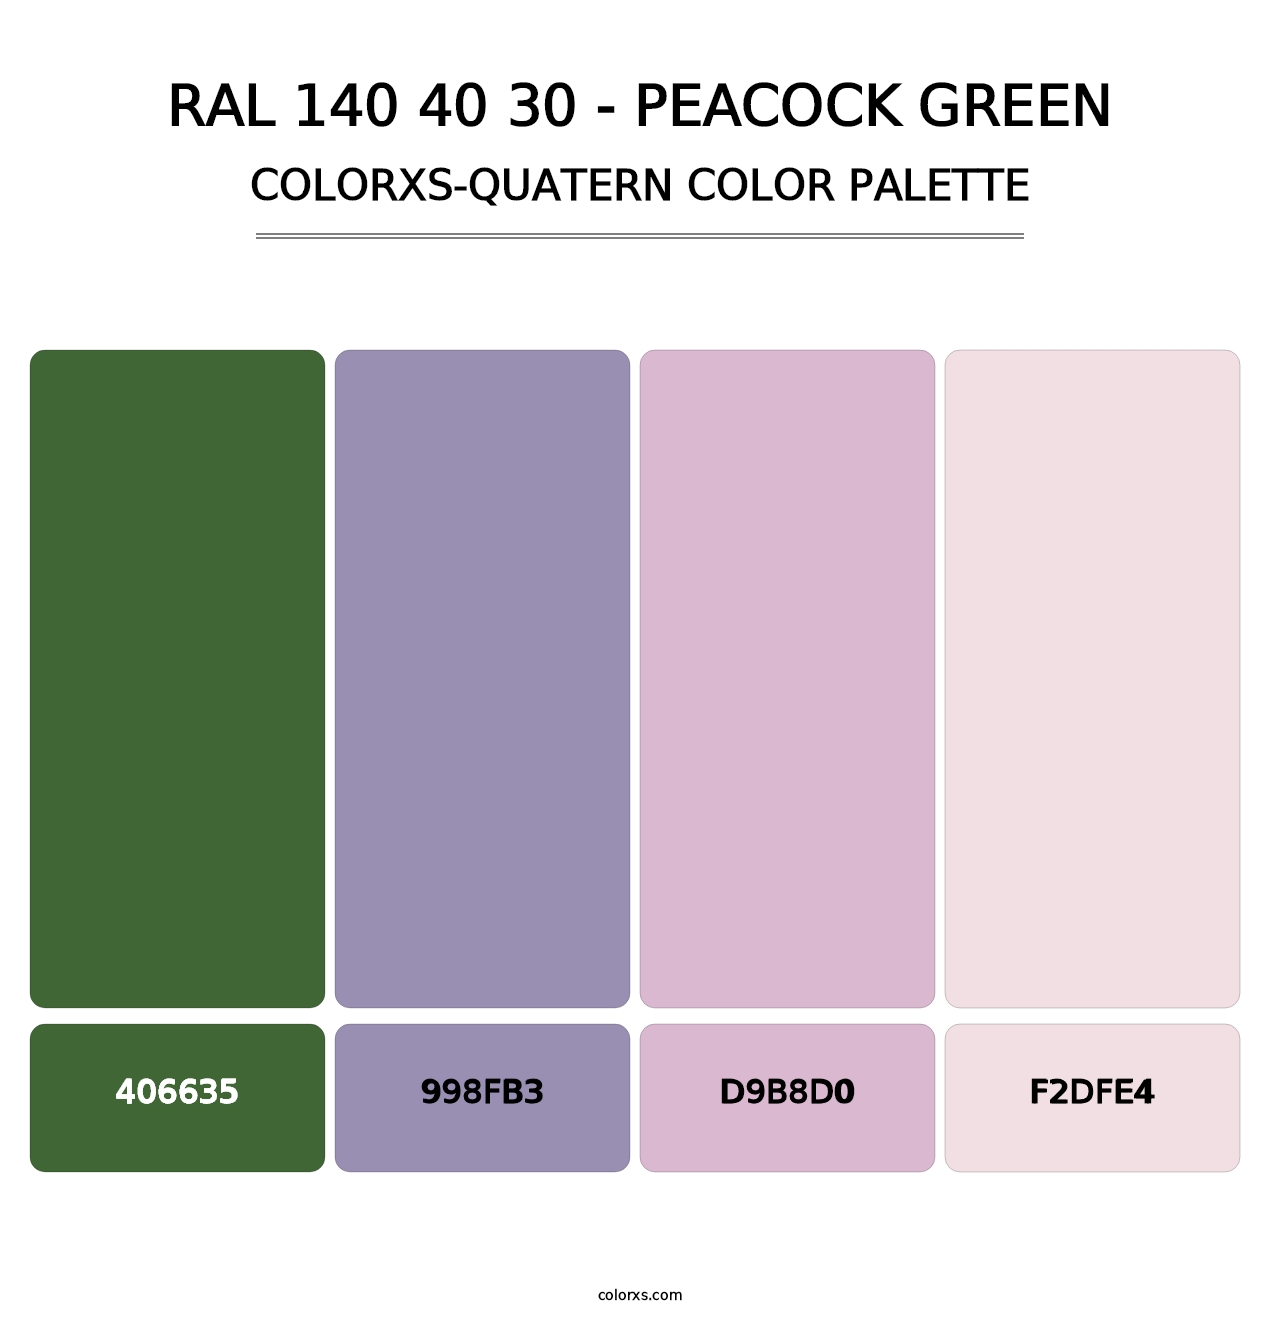 RAL 140 40 30 - Peacock Green - Colorxs Quatern Palette